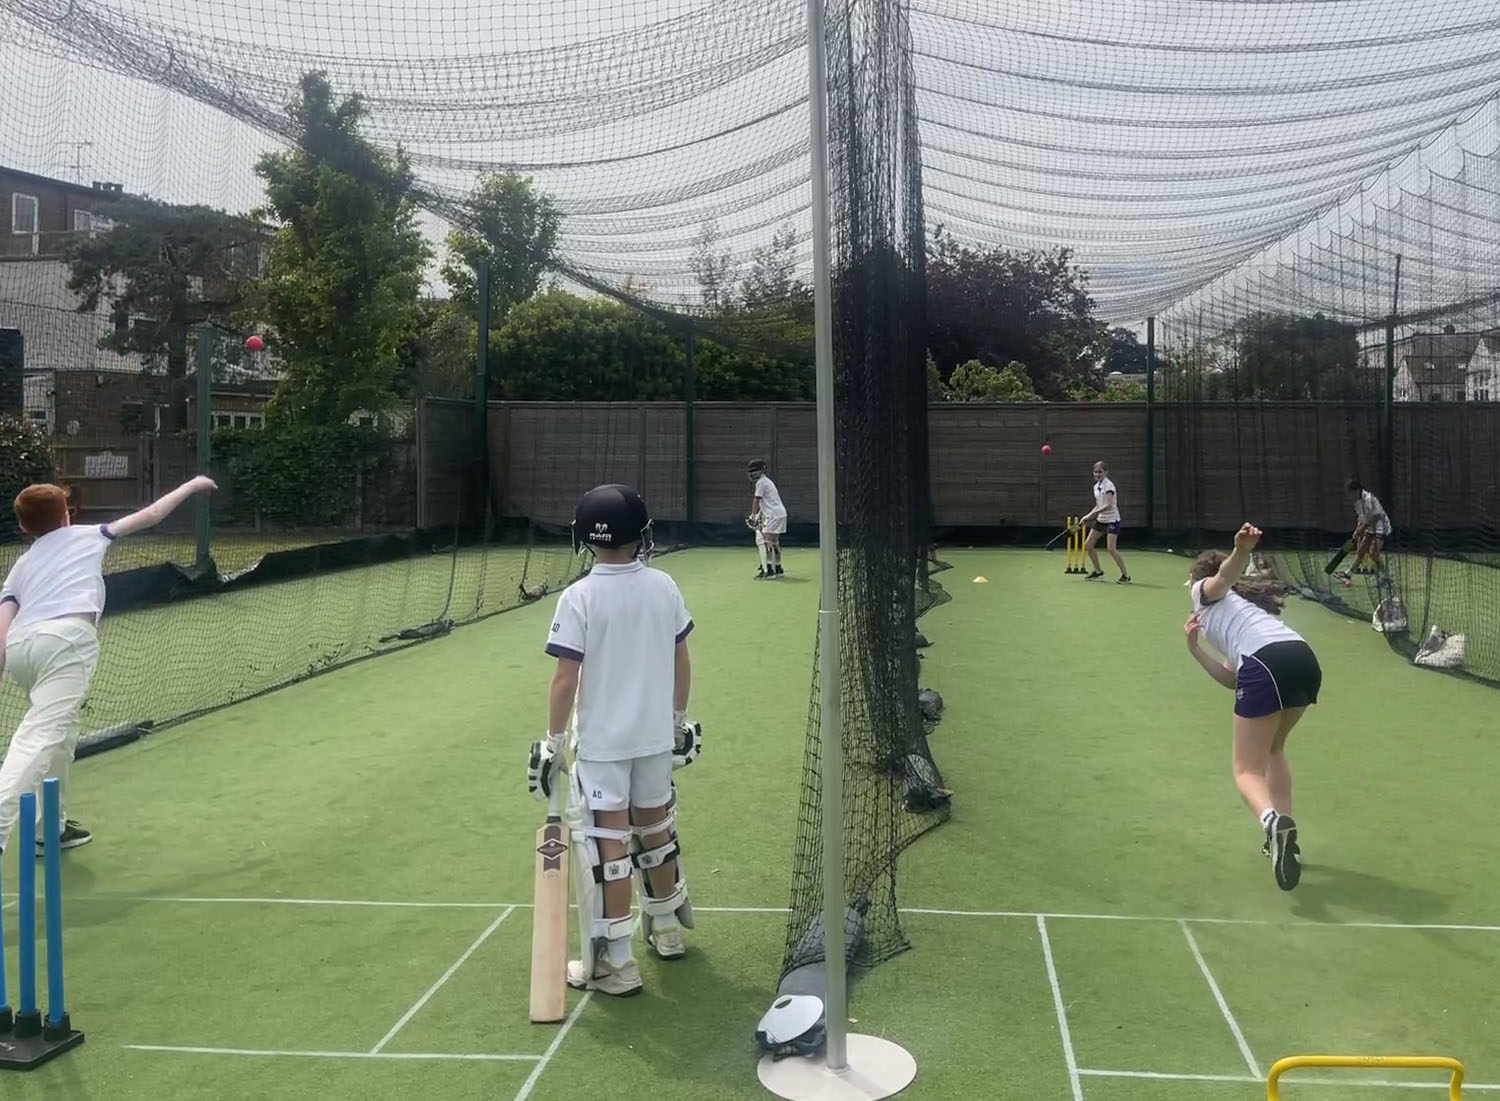 Girls and boys in the nets